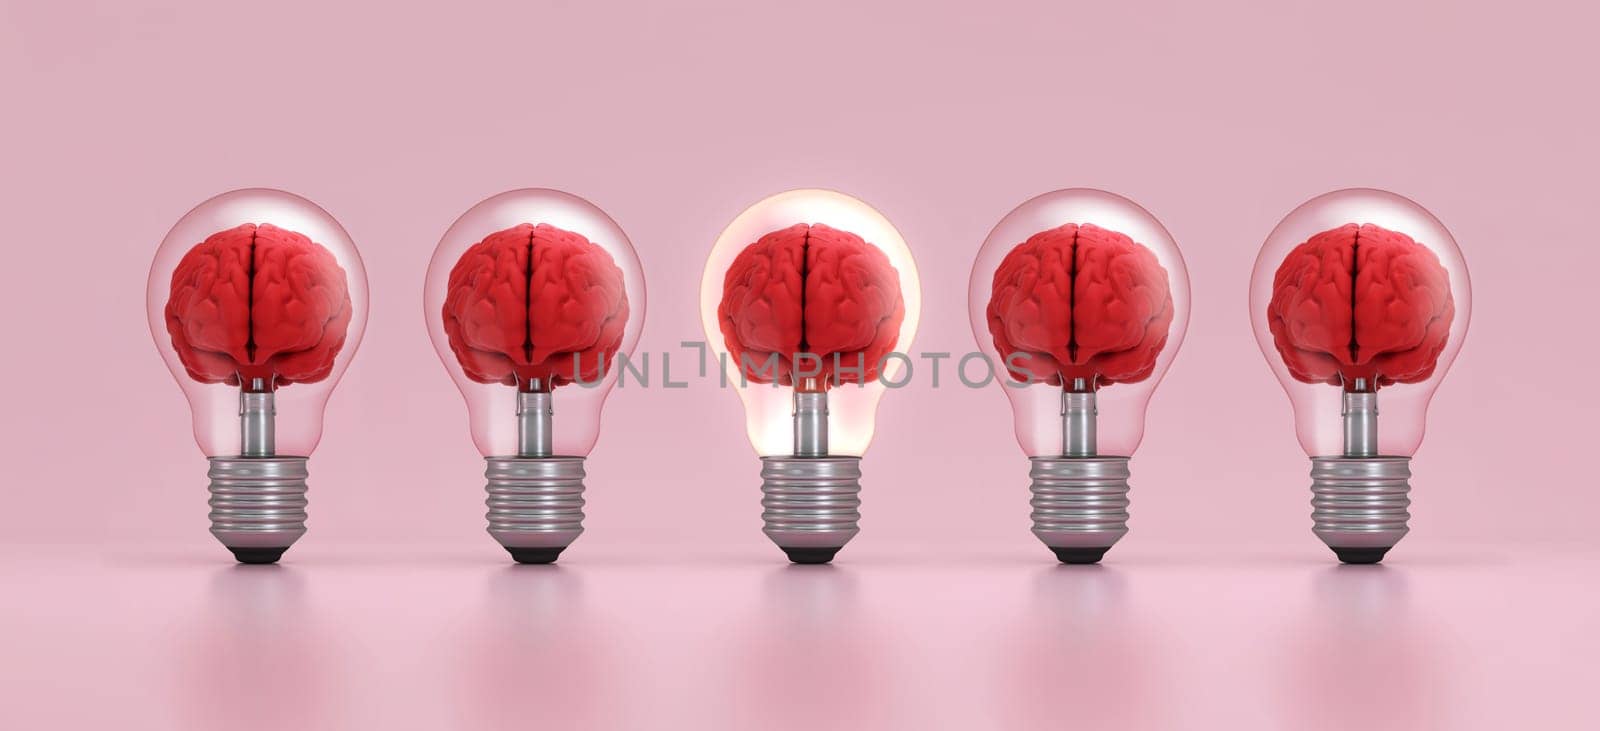 Brain inside a light bulb illuminated standing out from the crowd on pink background. Concept of inspiration. by ImagesRouges